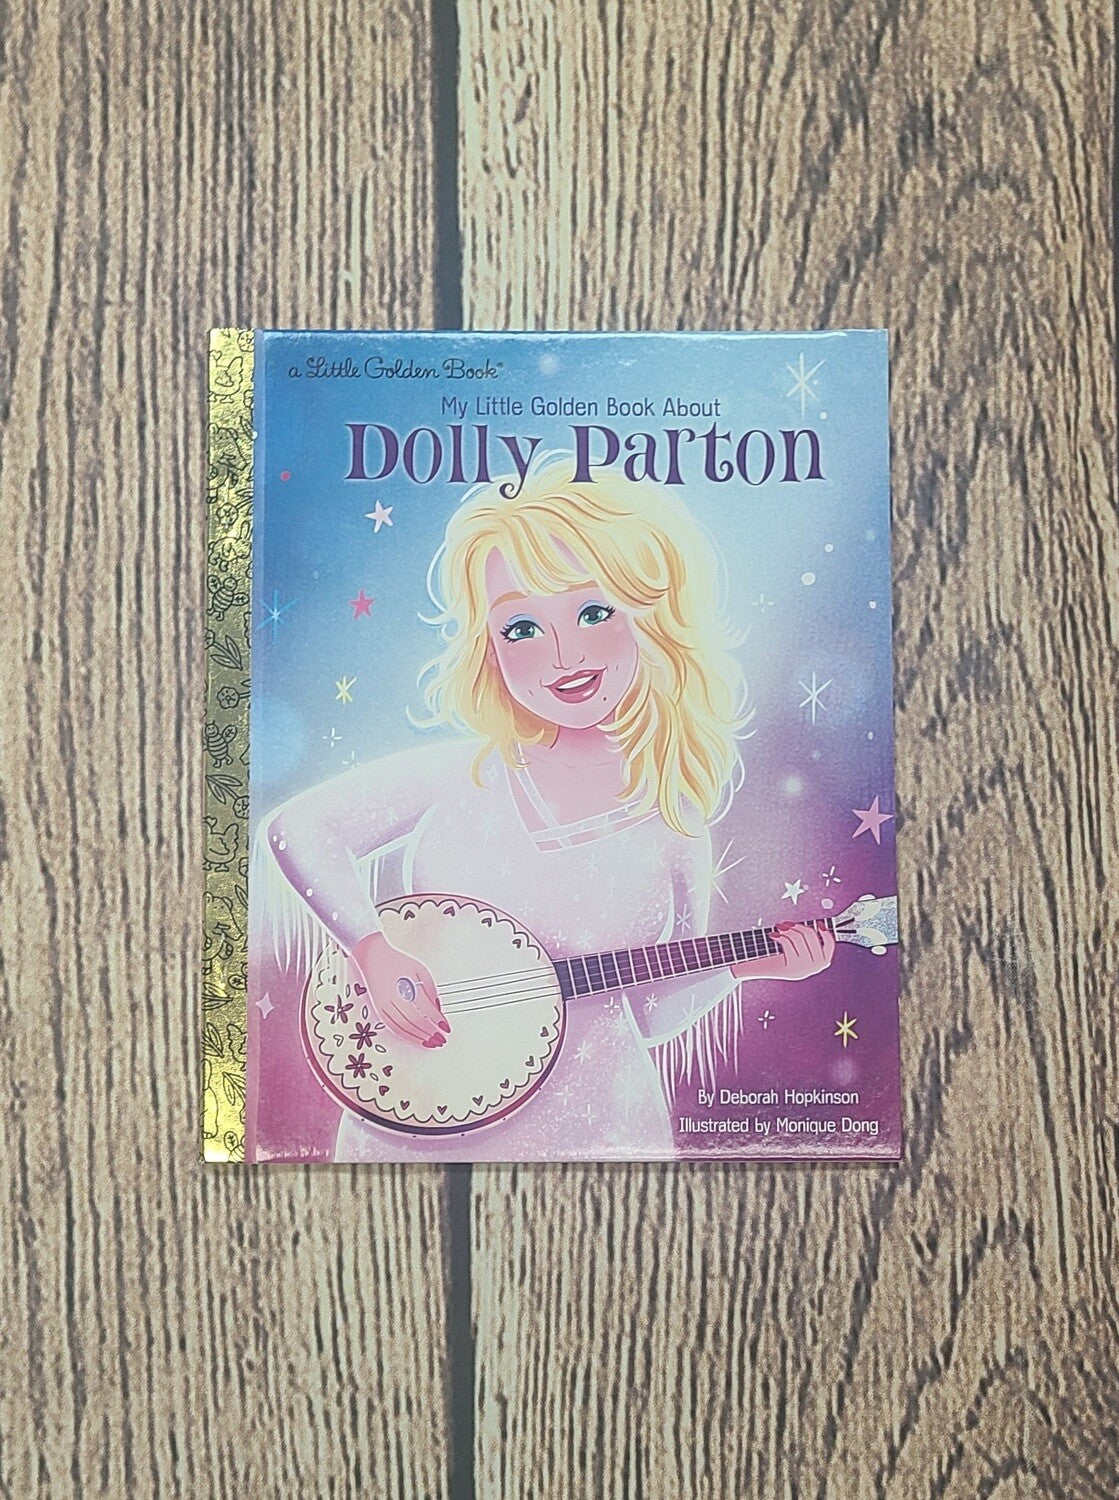 My Little Golden Book About: Dolly Parton